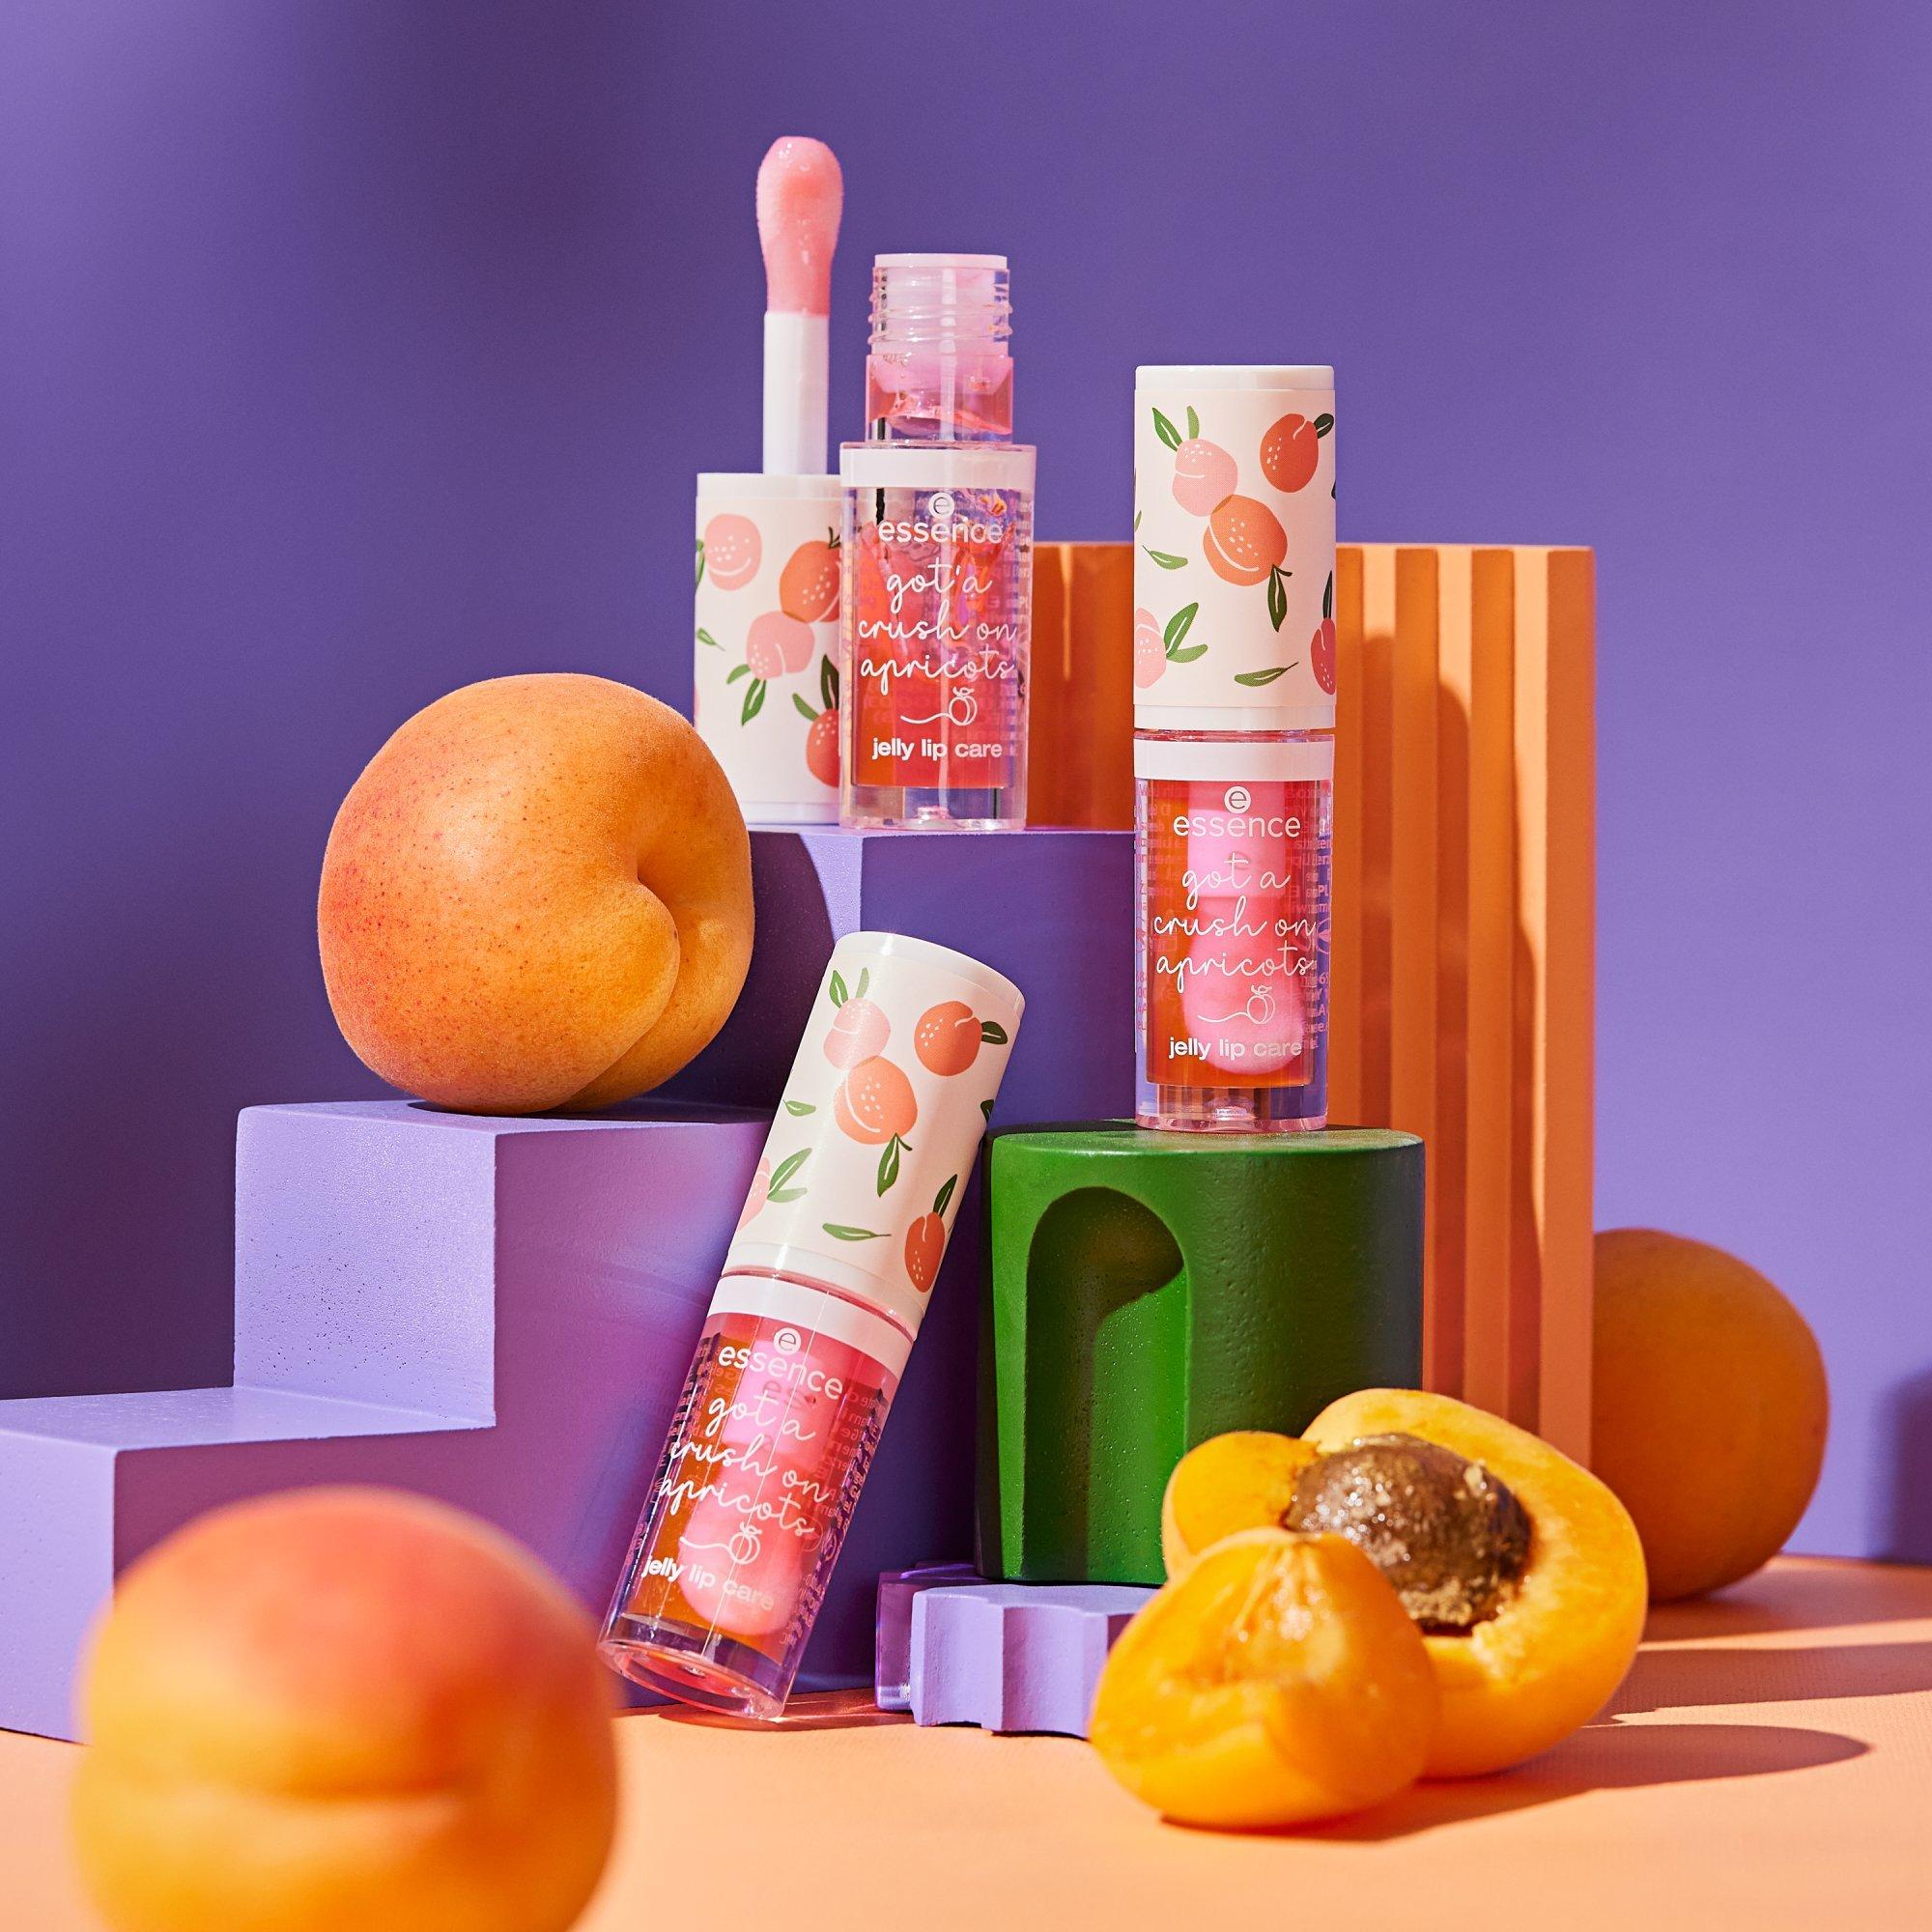 balsam do ust got a crush on apricots jelly lip care